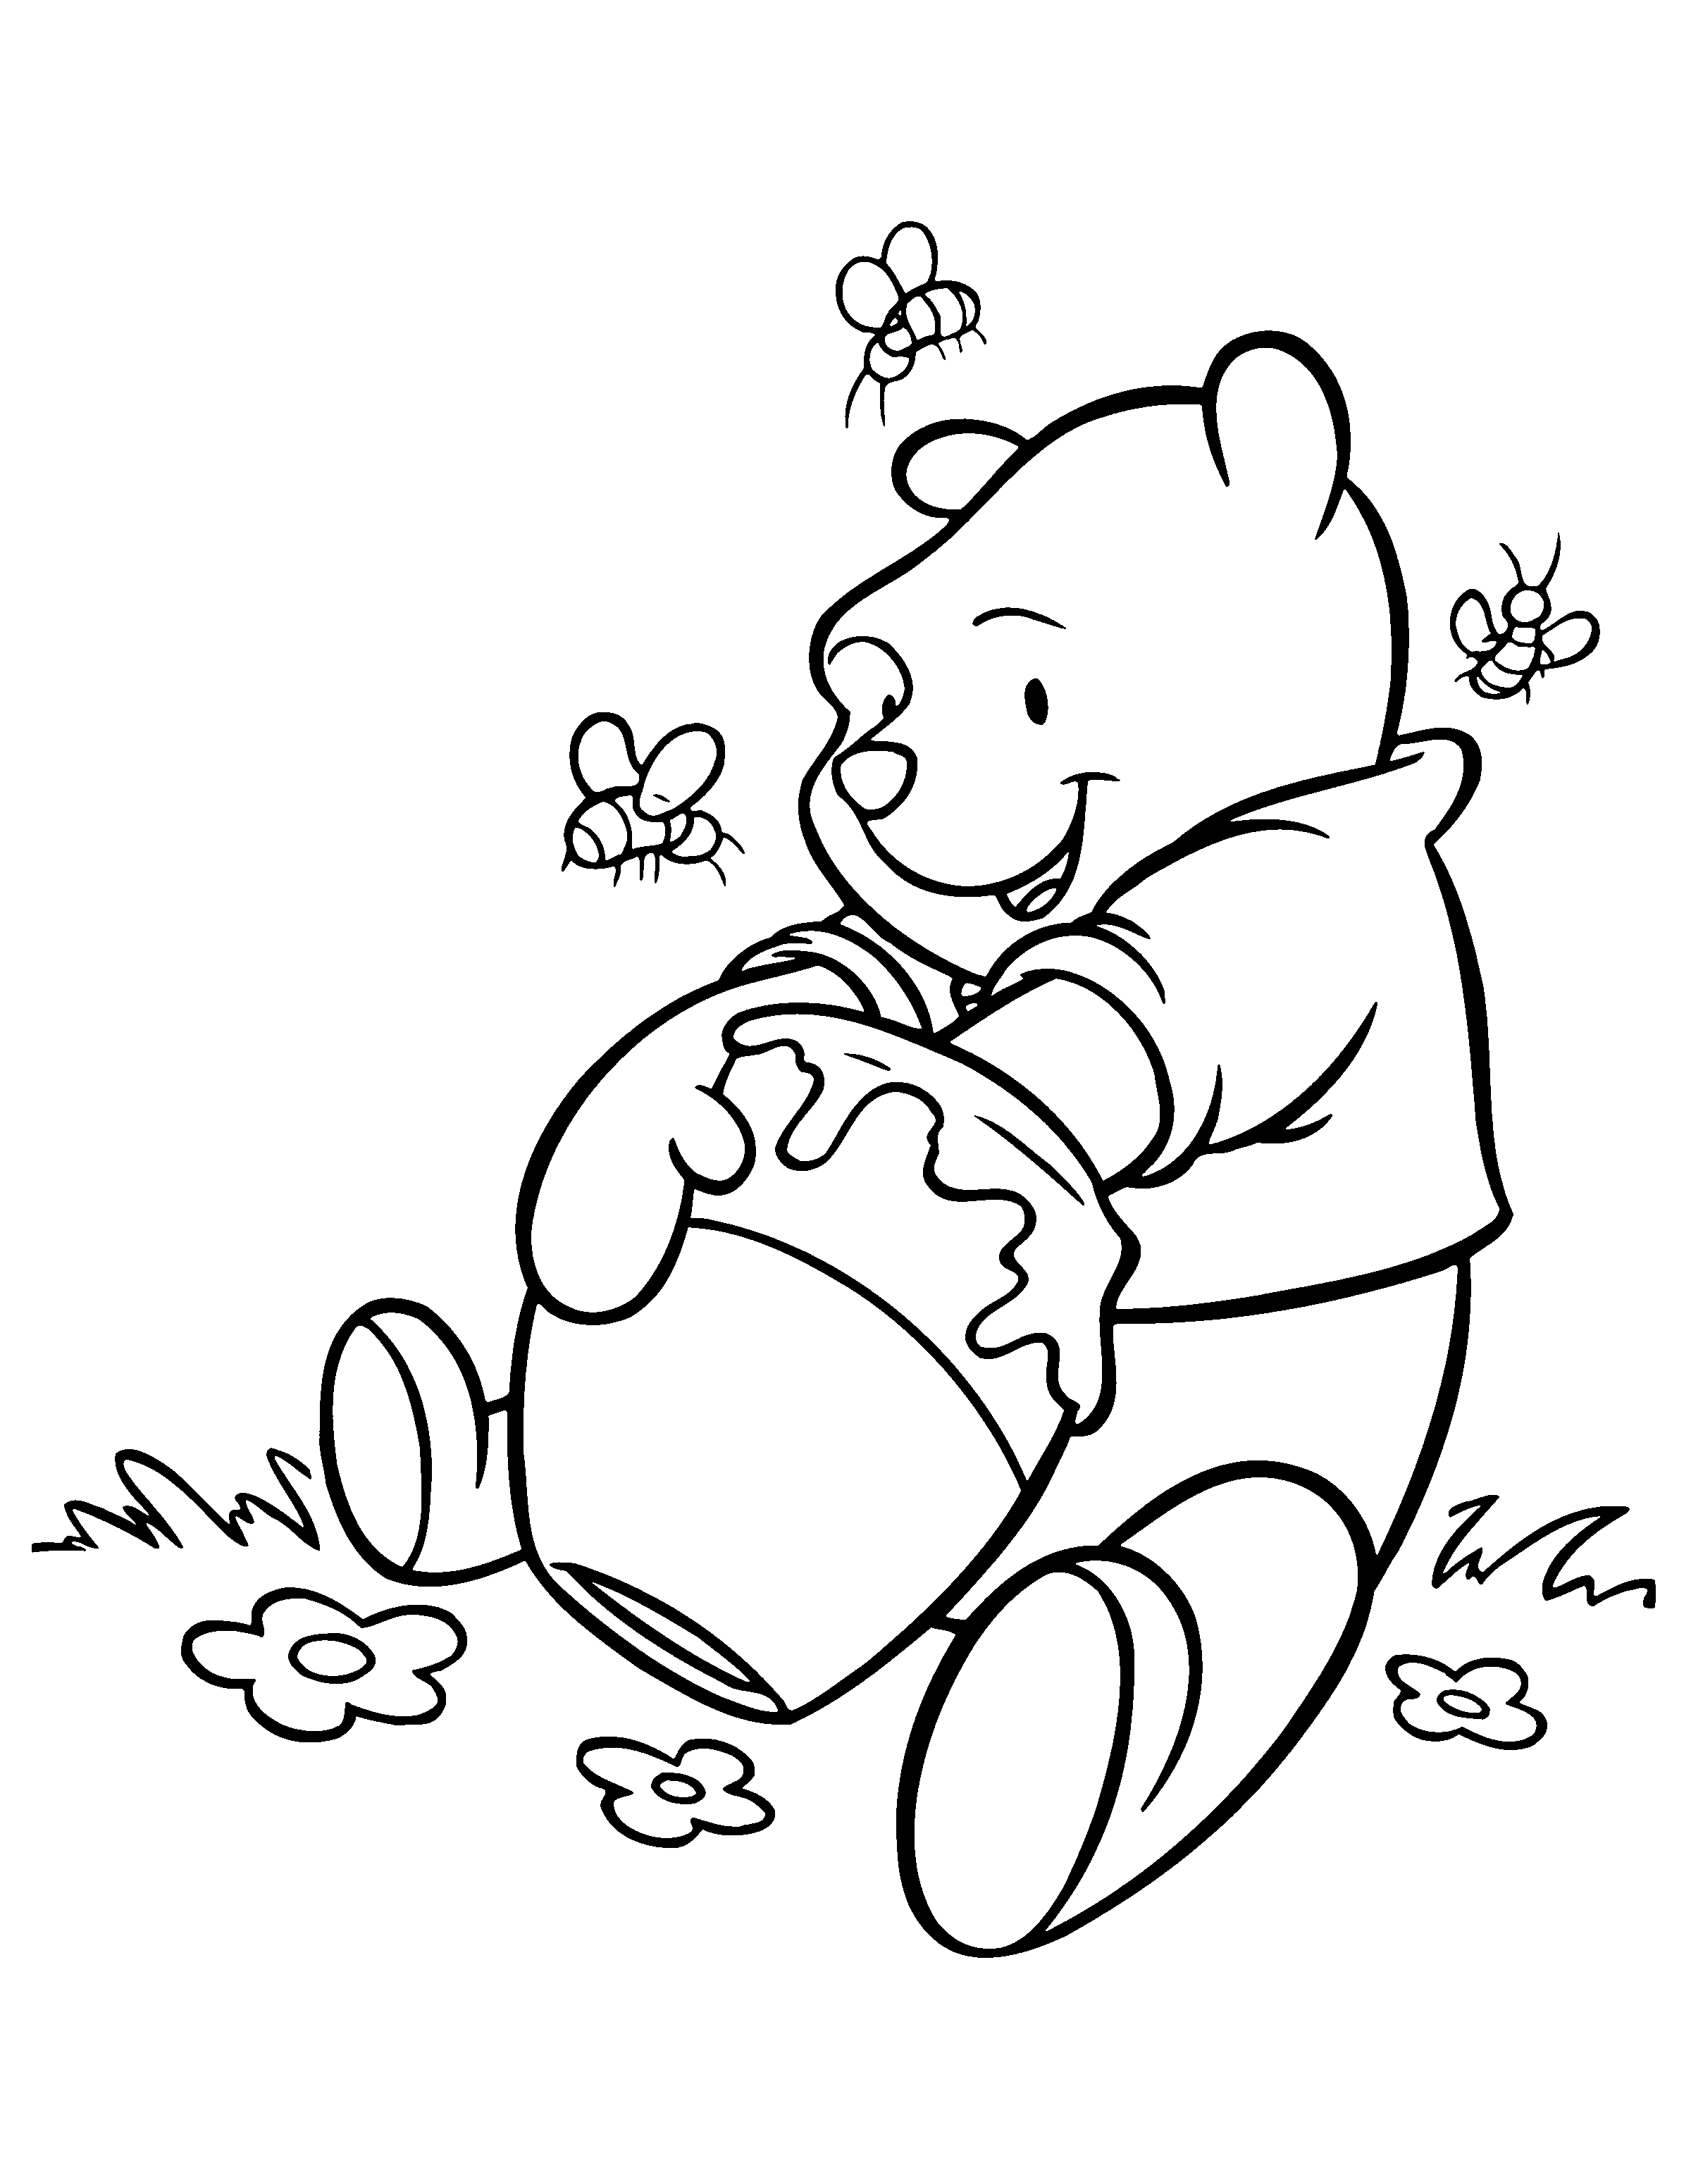 Download Free Printable Winnie The Pooh Coloring Pages For Kids